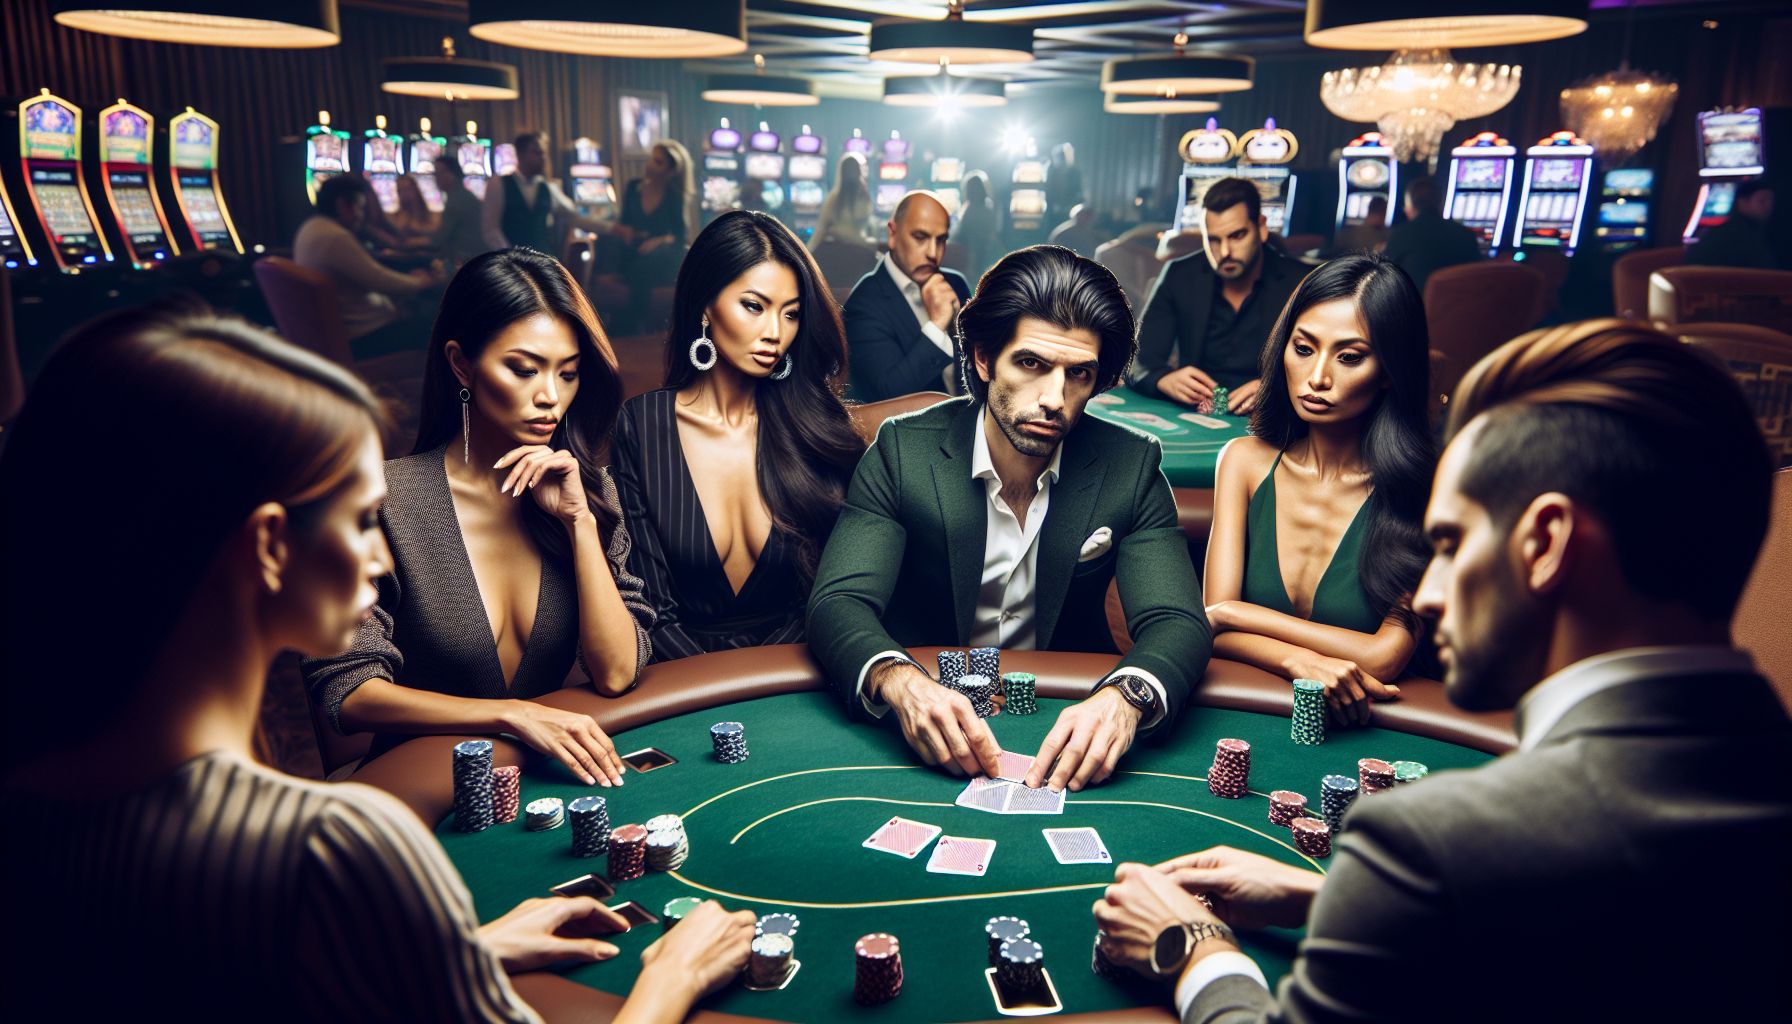 Reading the Room: Body Language and Tactics in Casino Poker